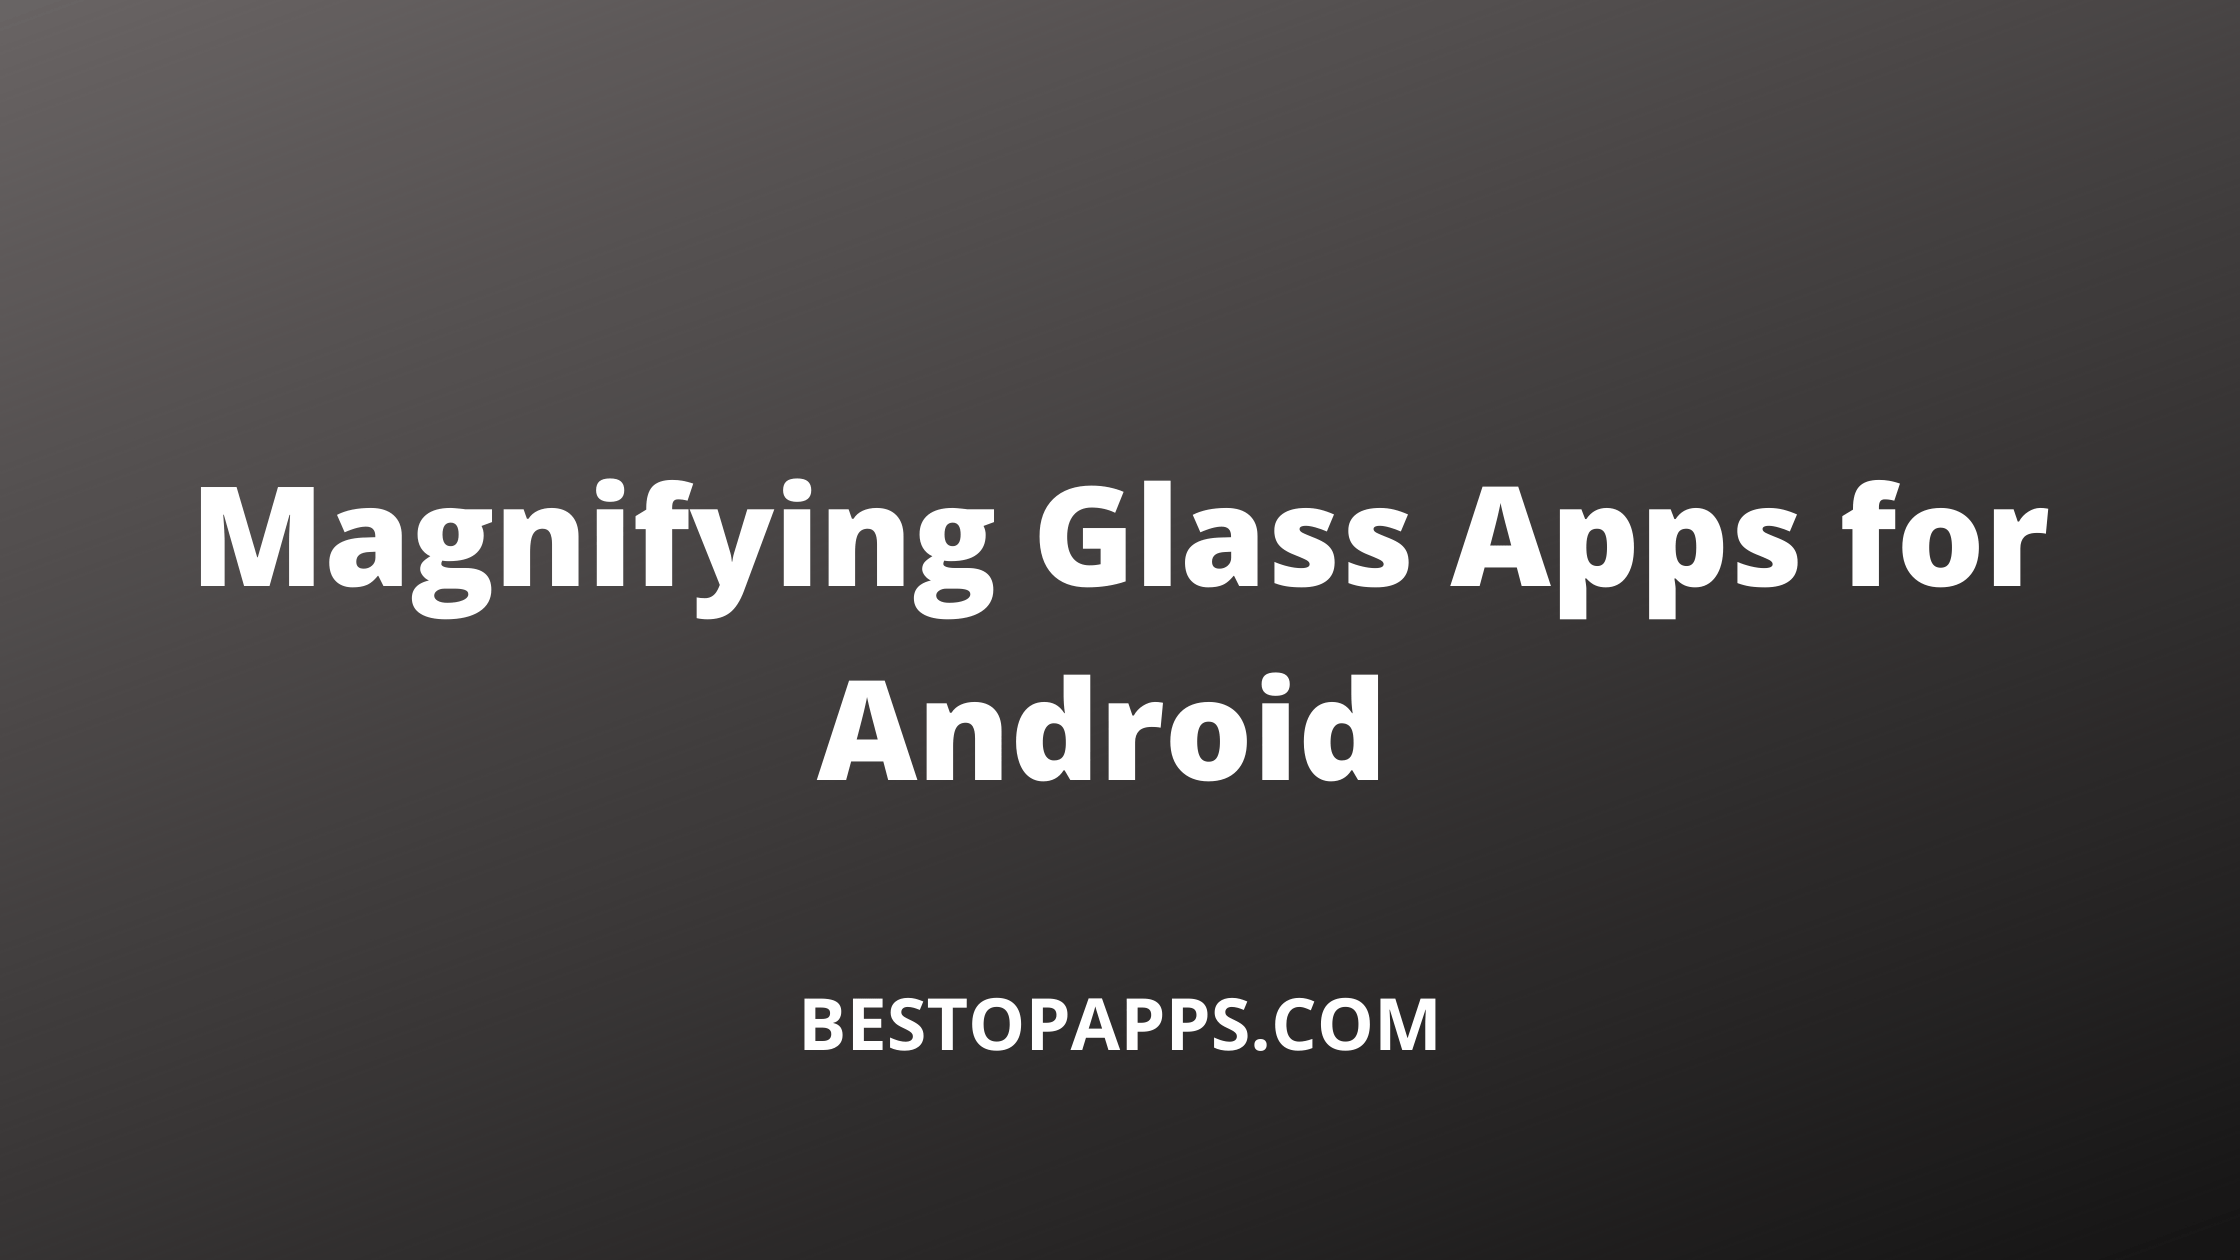 Magnifying Glass Apps for Android